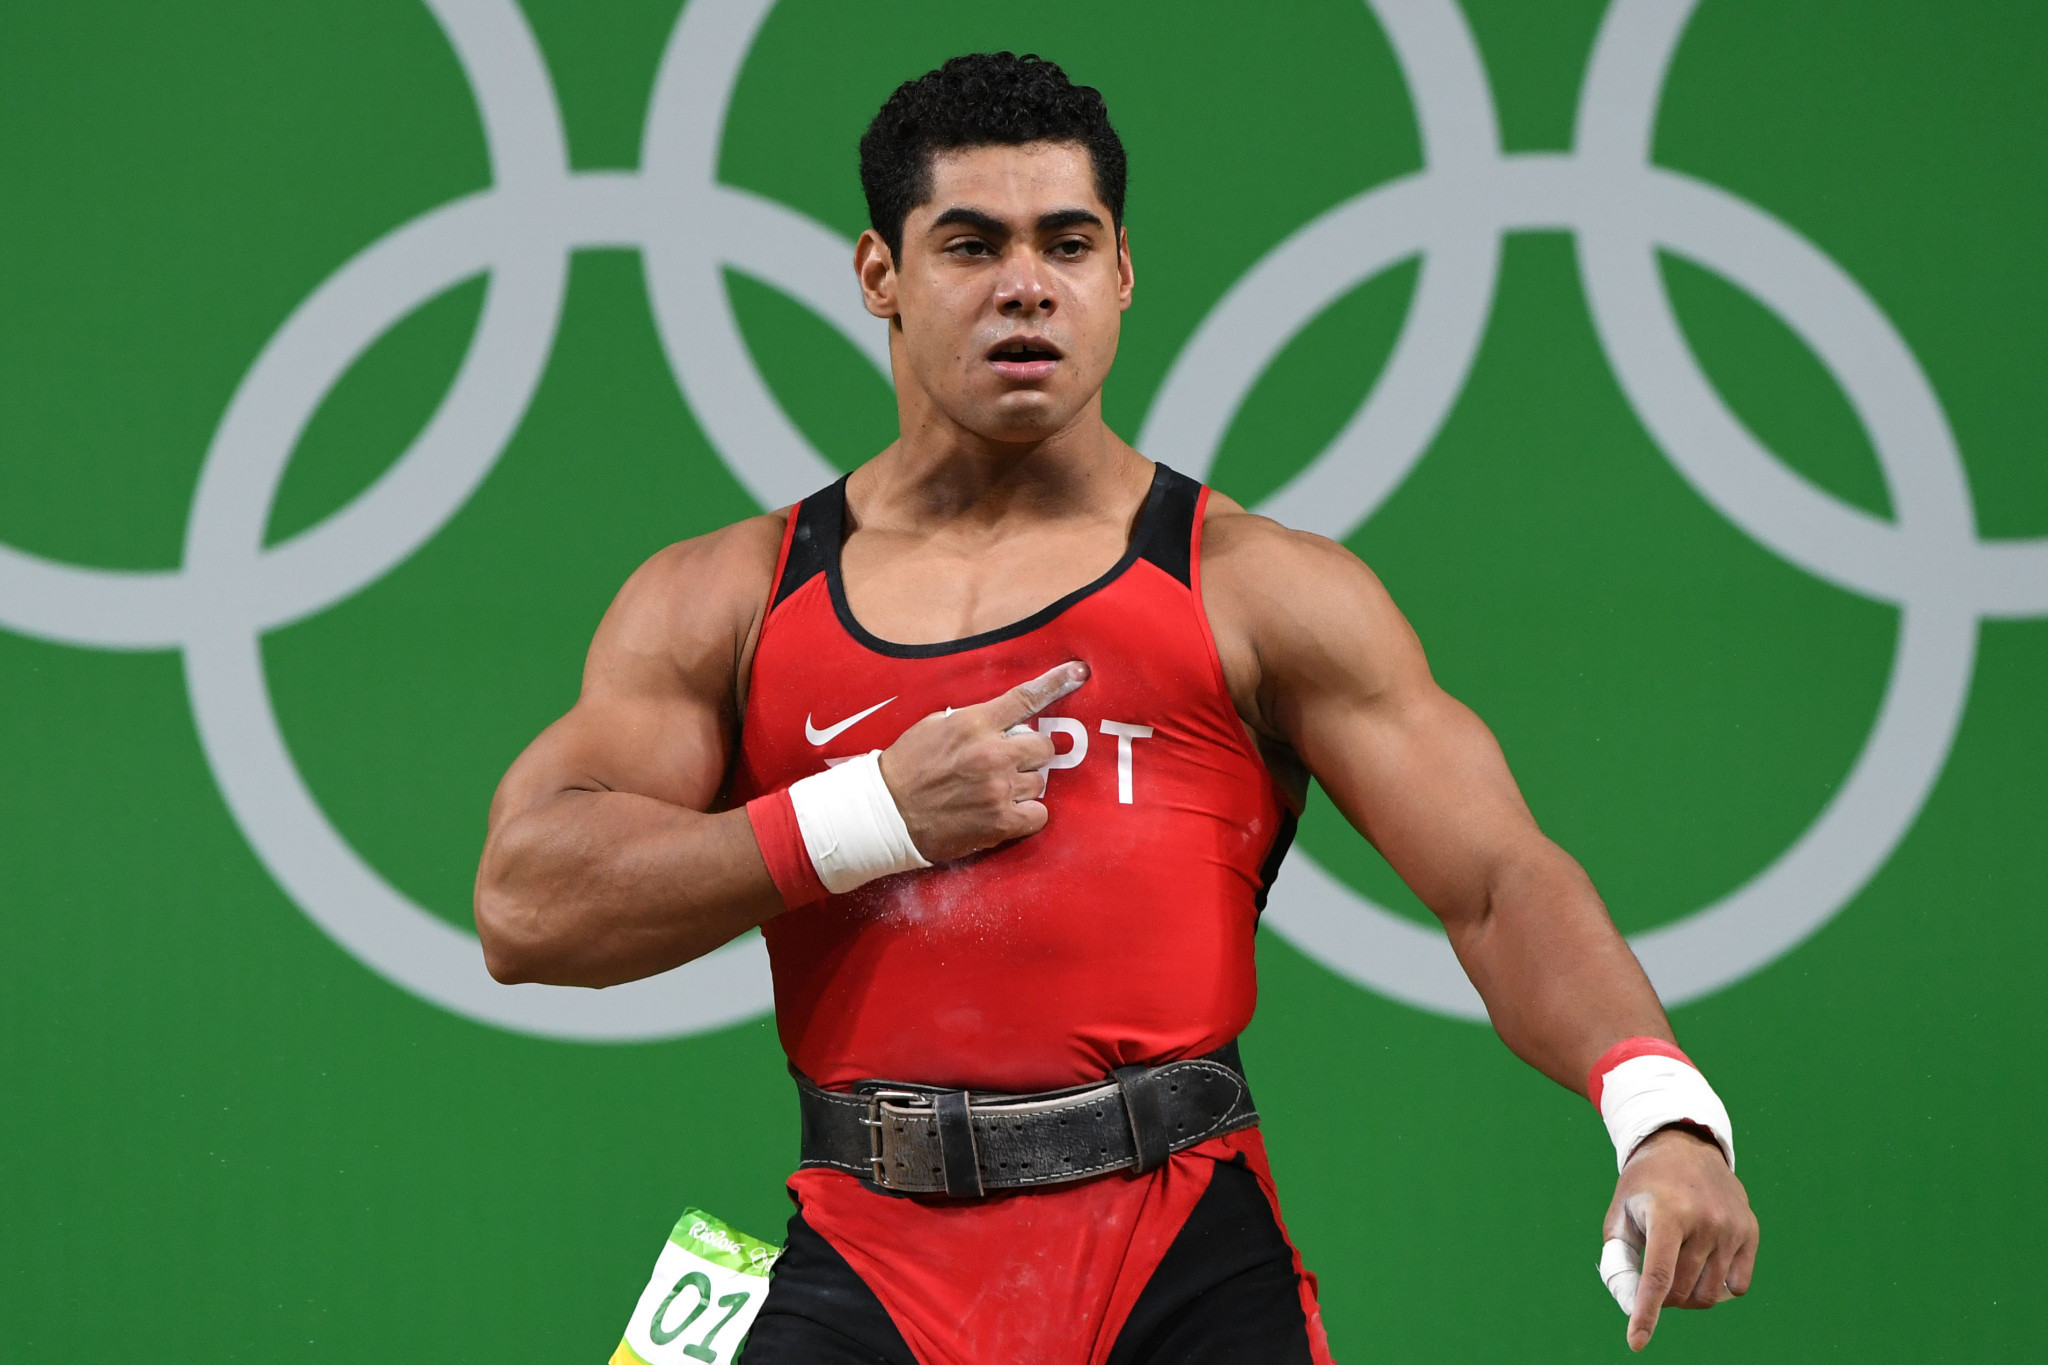 Mohamed Ehab won a bronze medal at the Rio 2016 Olympics but was unable to compete in Tokyo ©Getty Images